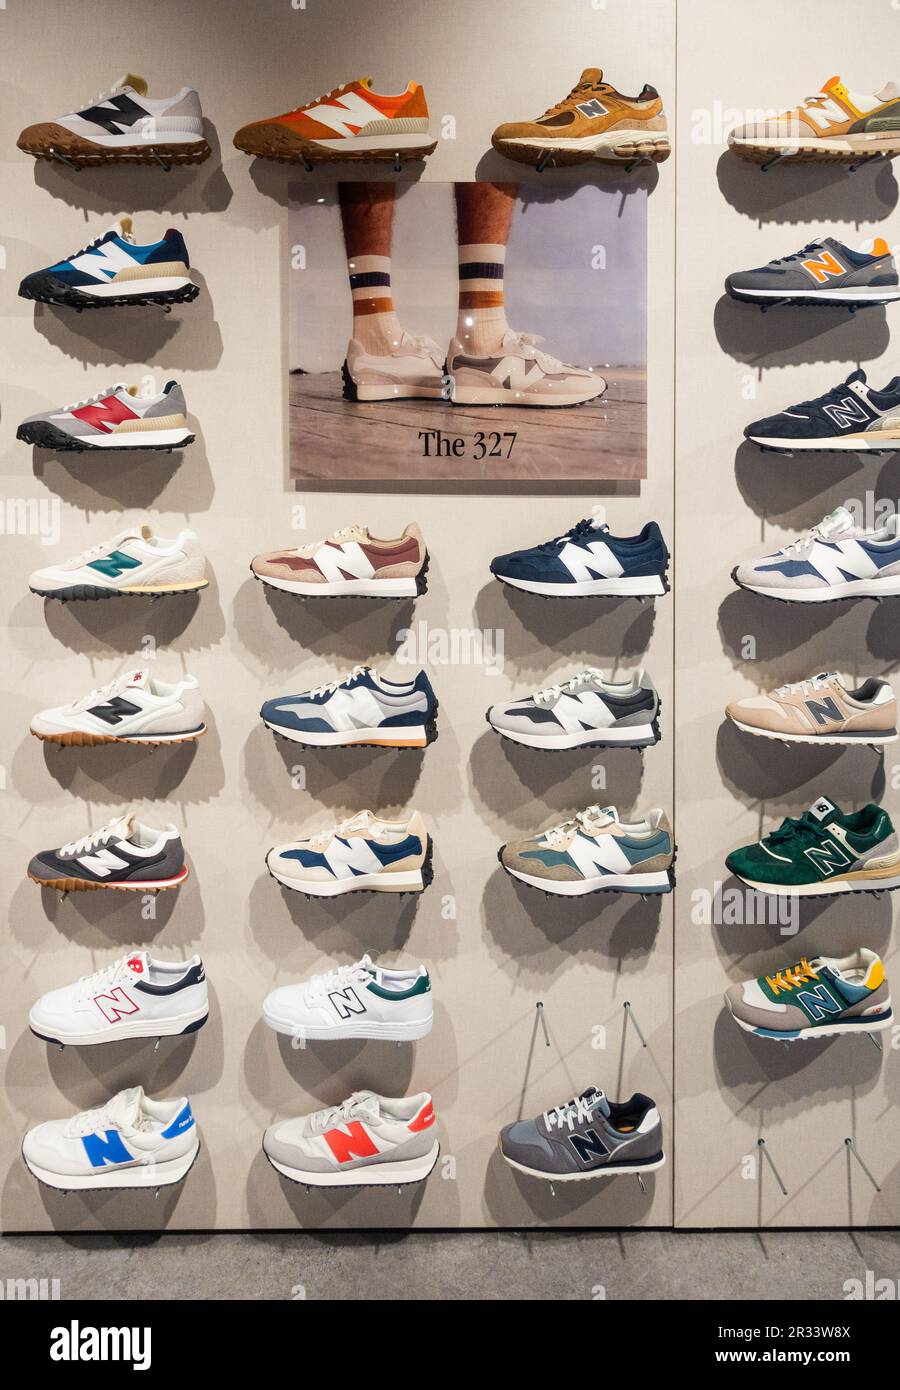 New Balance 327 trainers, training shoes, casual wear footwear display in sports store. Stock Photo